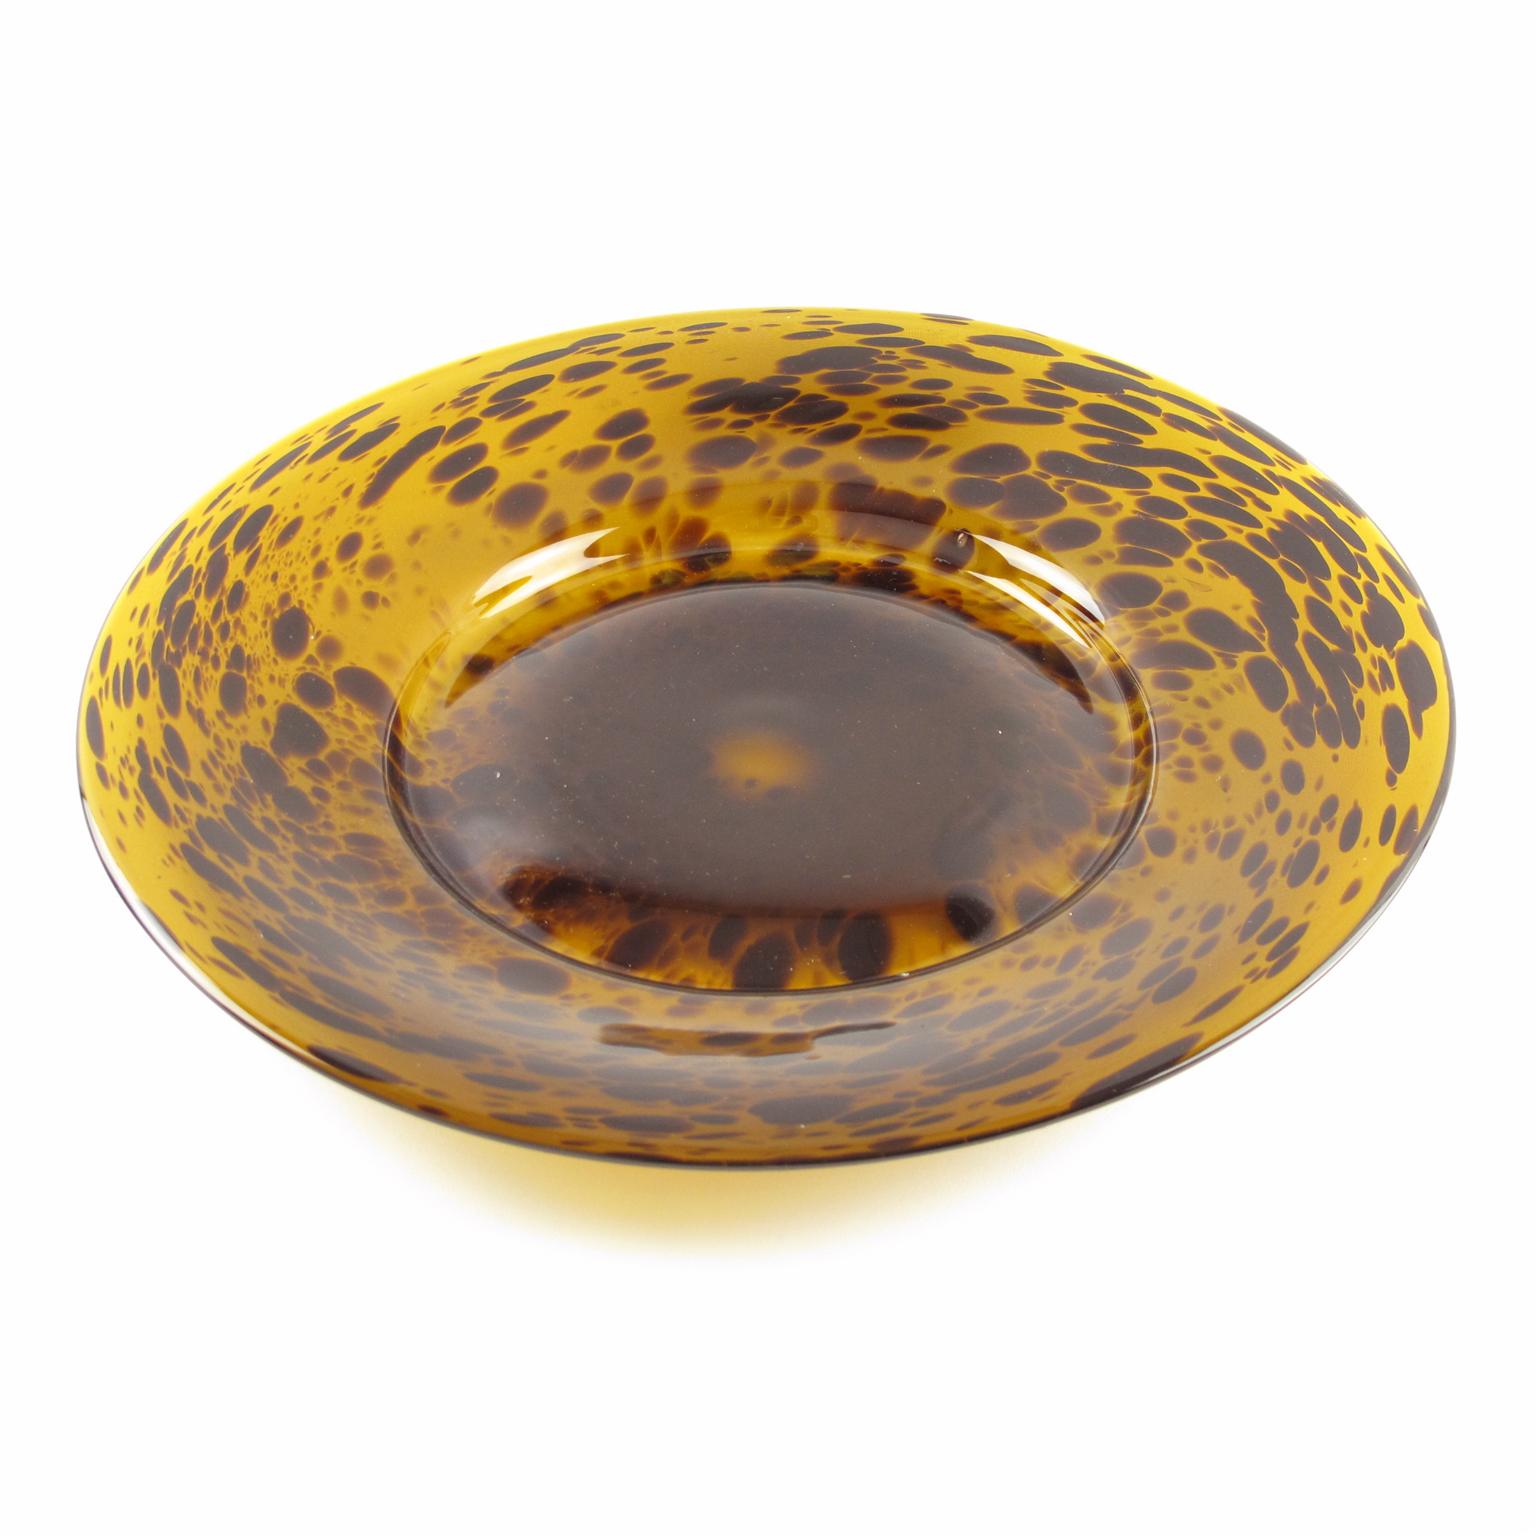 Sophisticated Italian glass large centerpiece or bowl or platter by Empoli. Mouth-blown in Italy with an exclusive tortoiseshell color flowing pattern. Polished pontil mark on the bottom. No visible maker's mark.
Measurements: 14.37 in. diameter